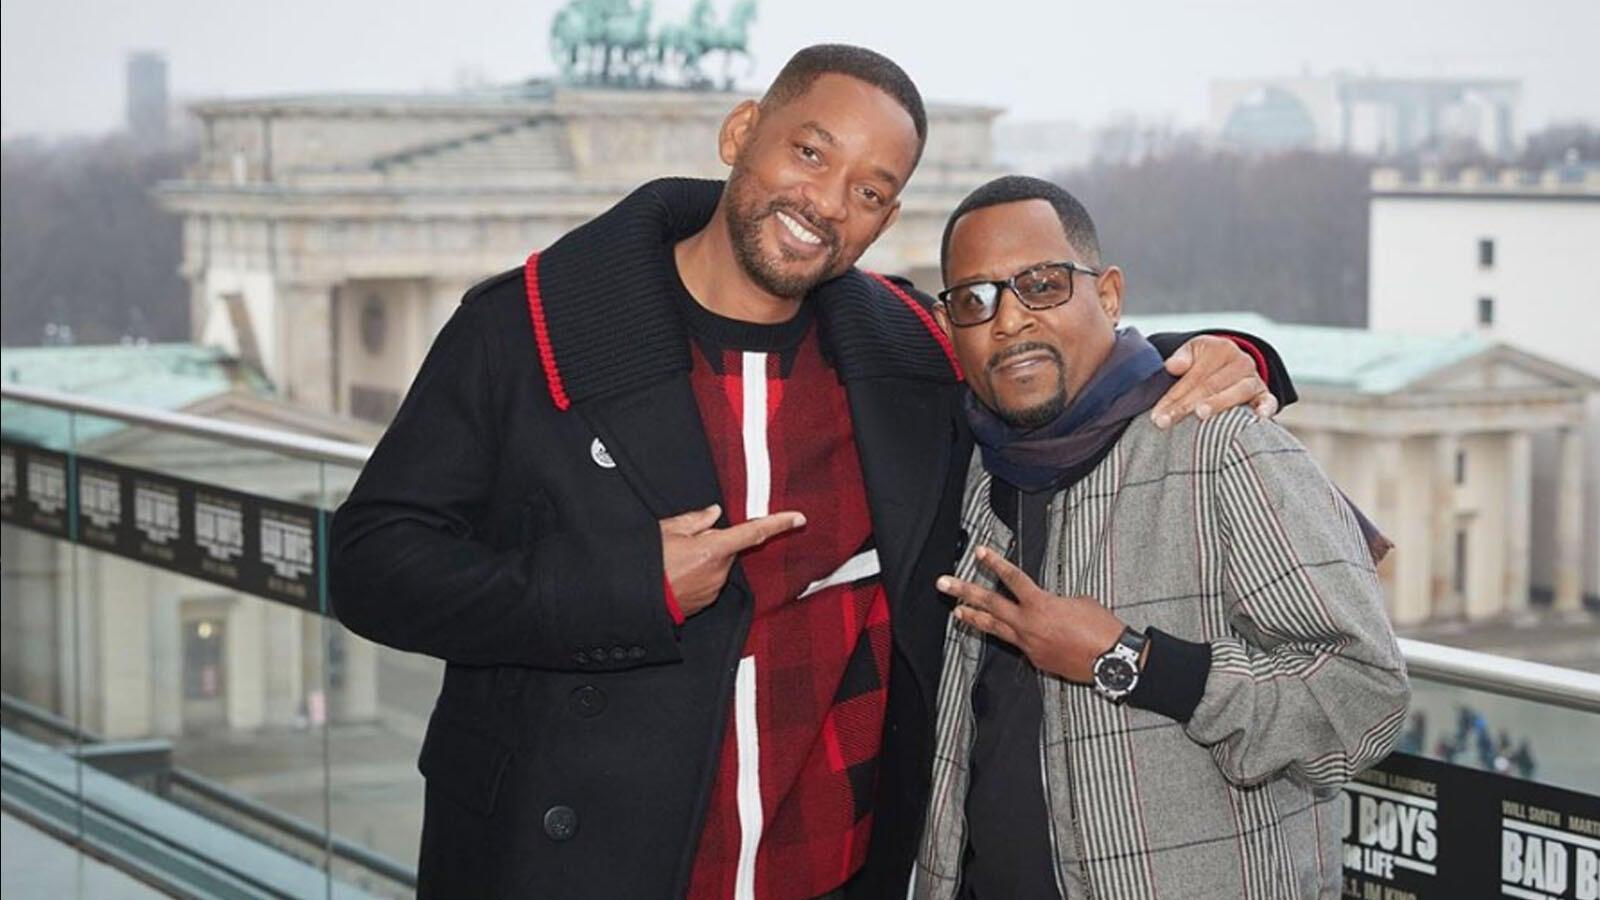 Bad Boys For Life' Earns $59.2 Million in Receipts